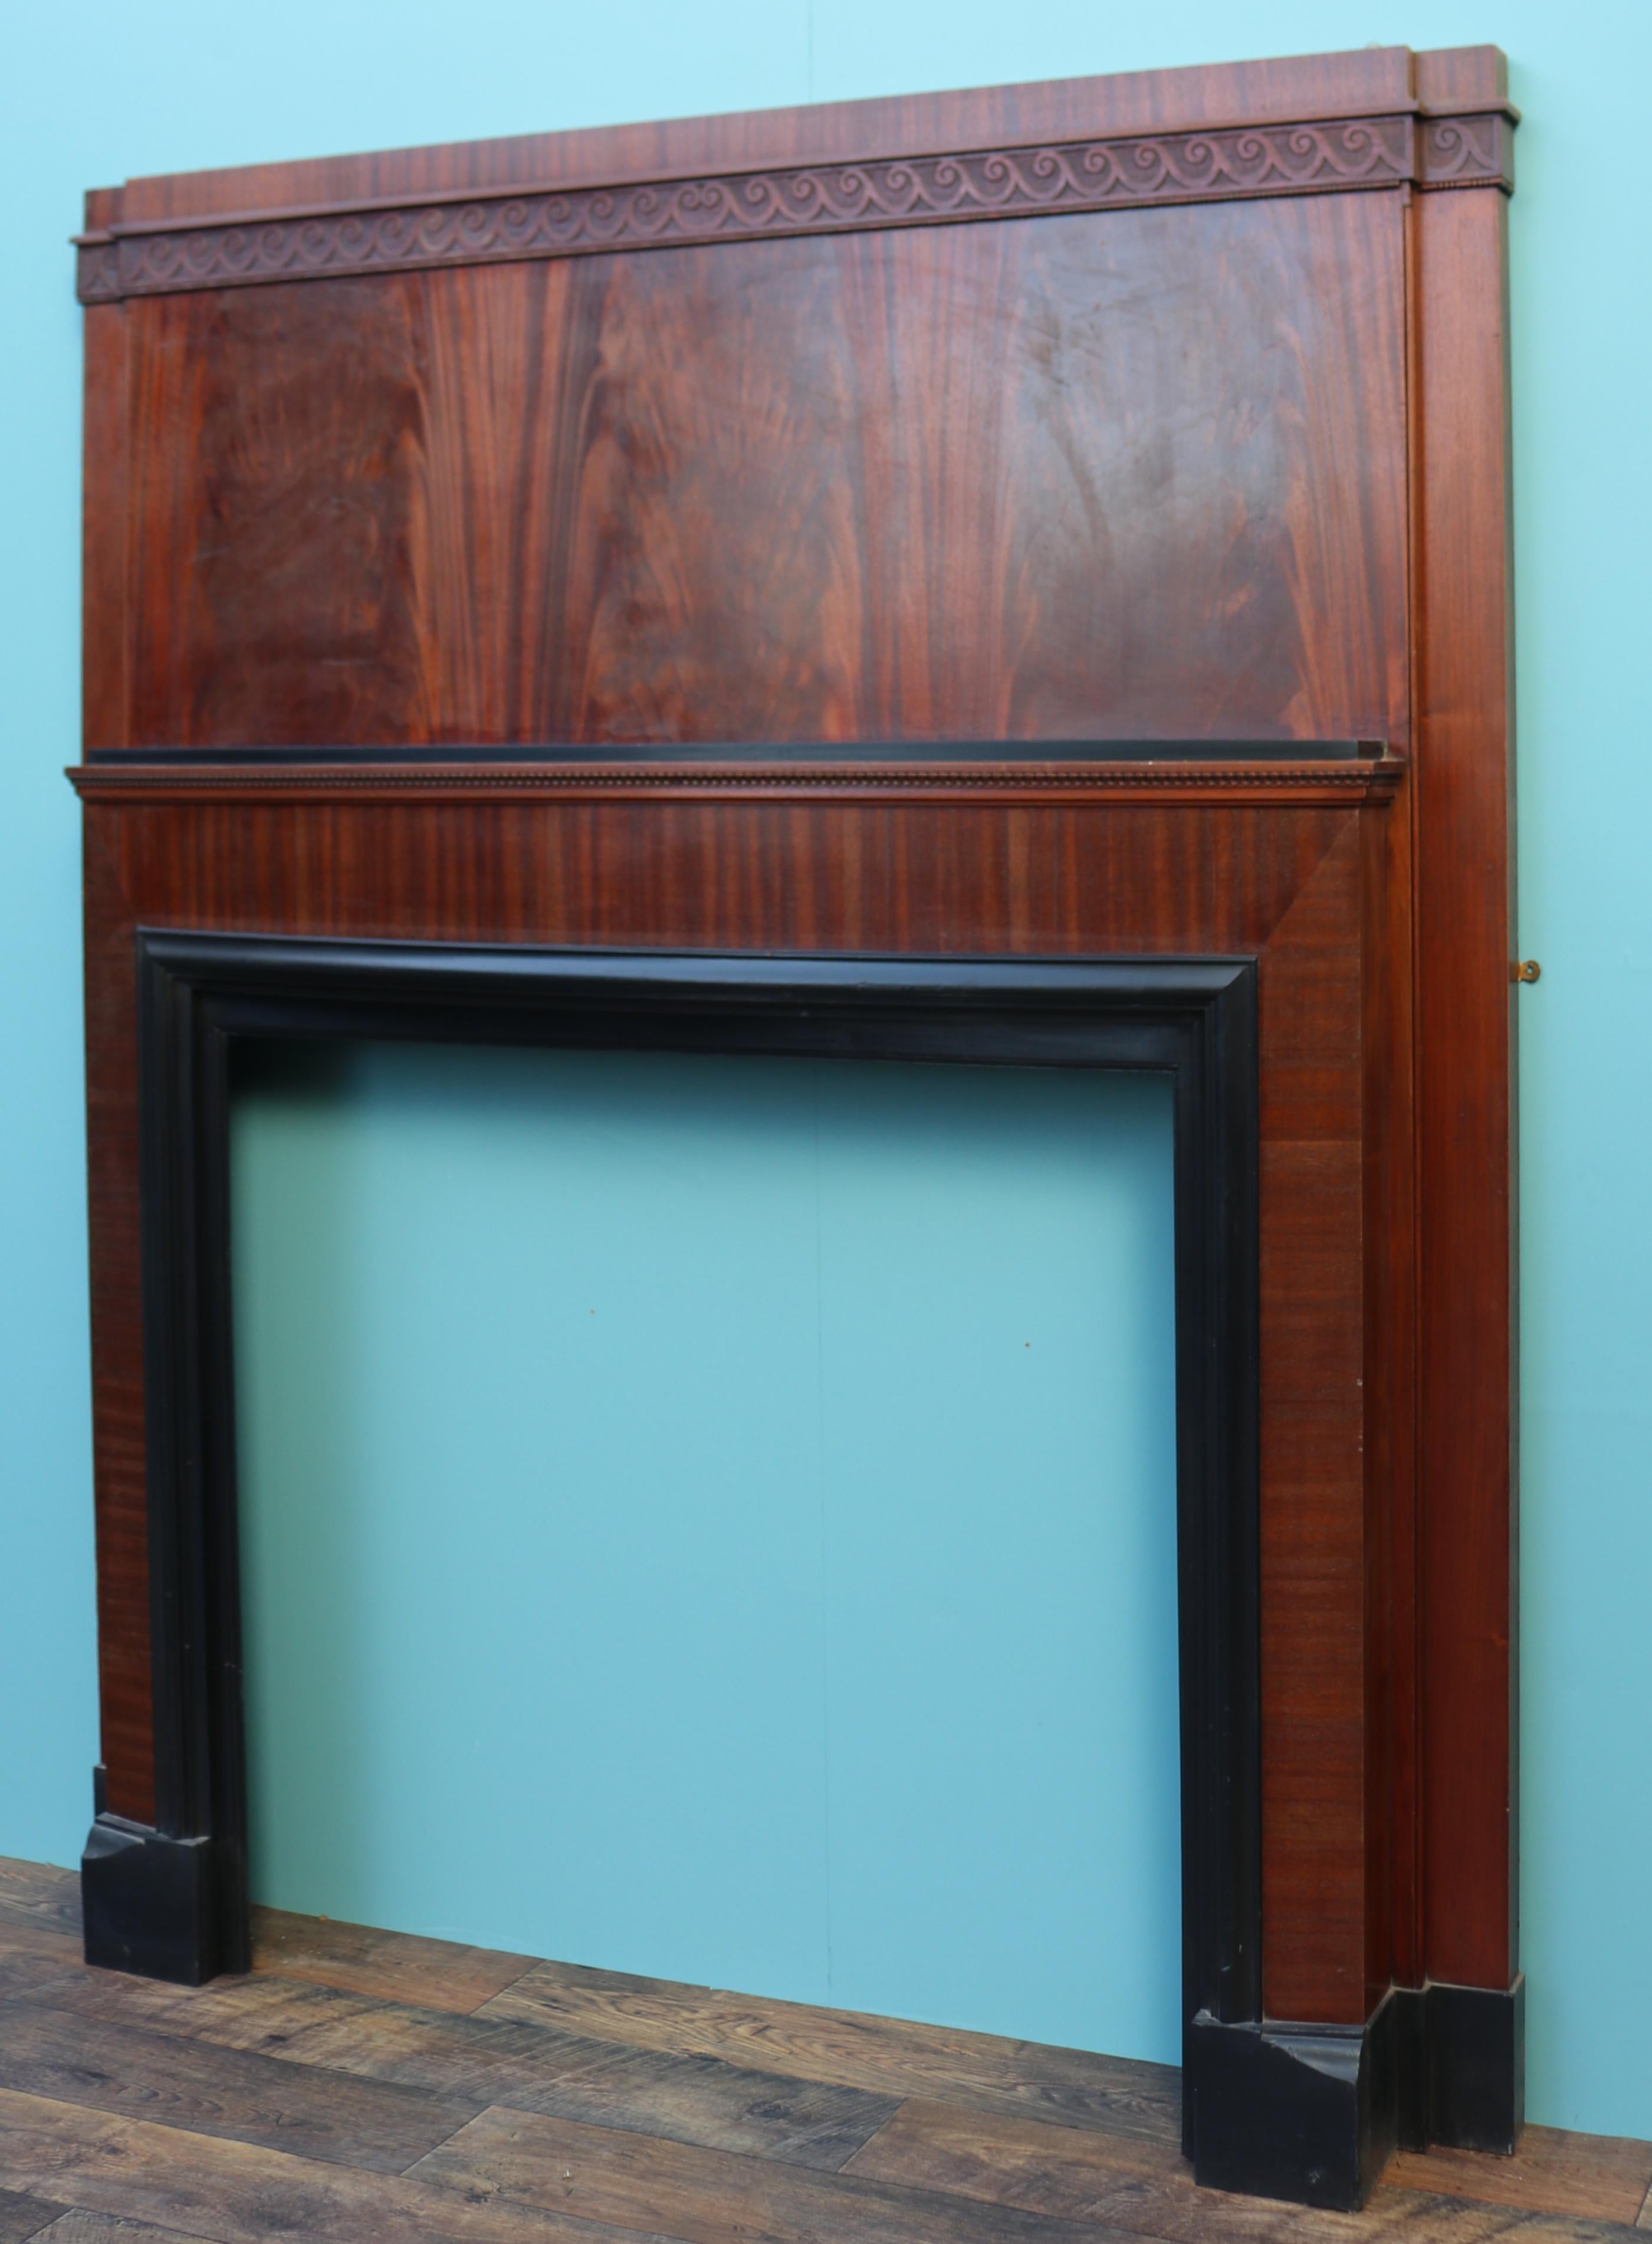 A large Art Deco fireplace veneered in flame mahogany, with painted matt black shelf and trim.

Additional Dimensions:

Opening height 101 cm

Opening width 105.5 cm